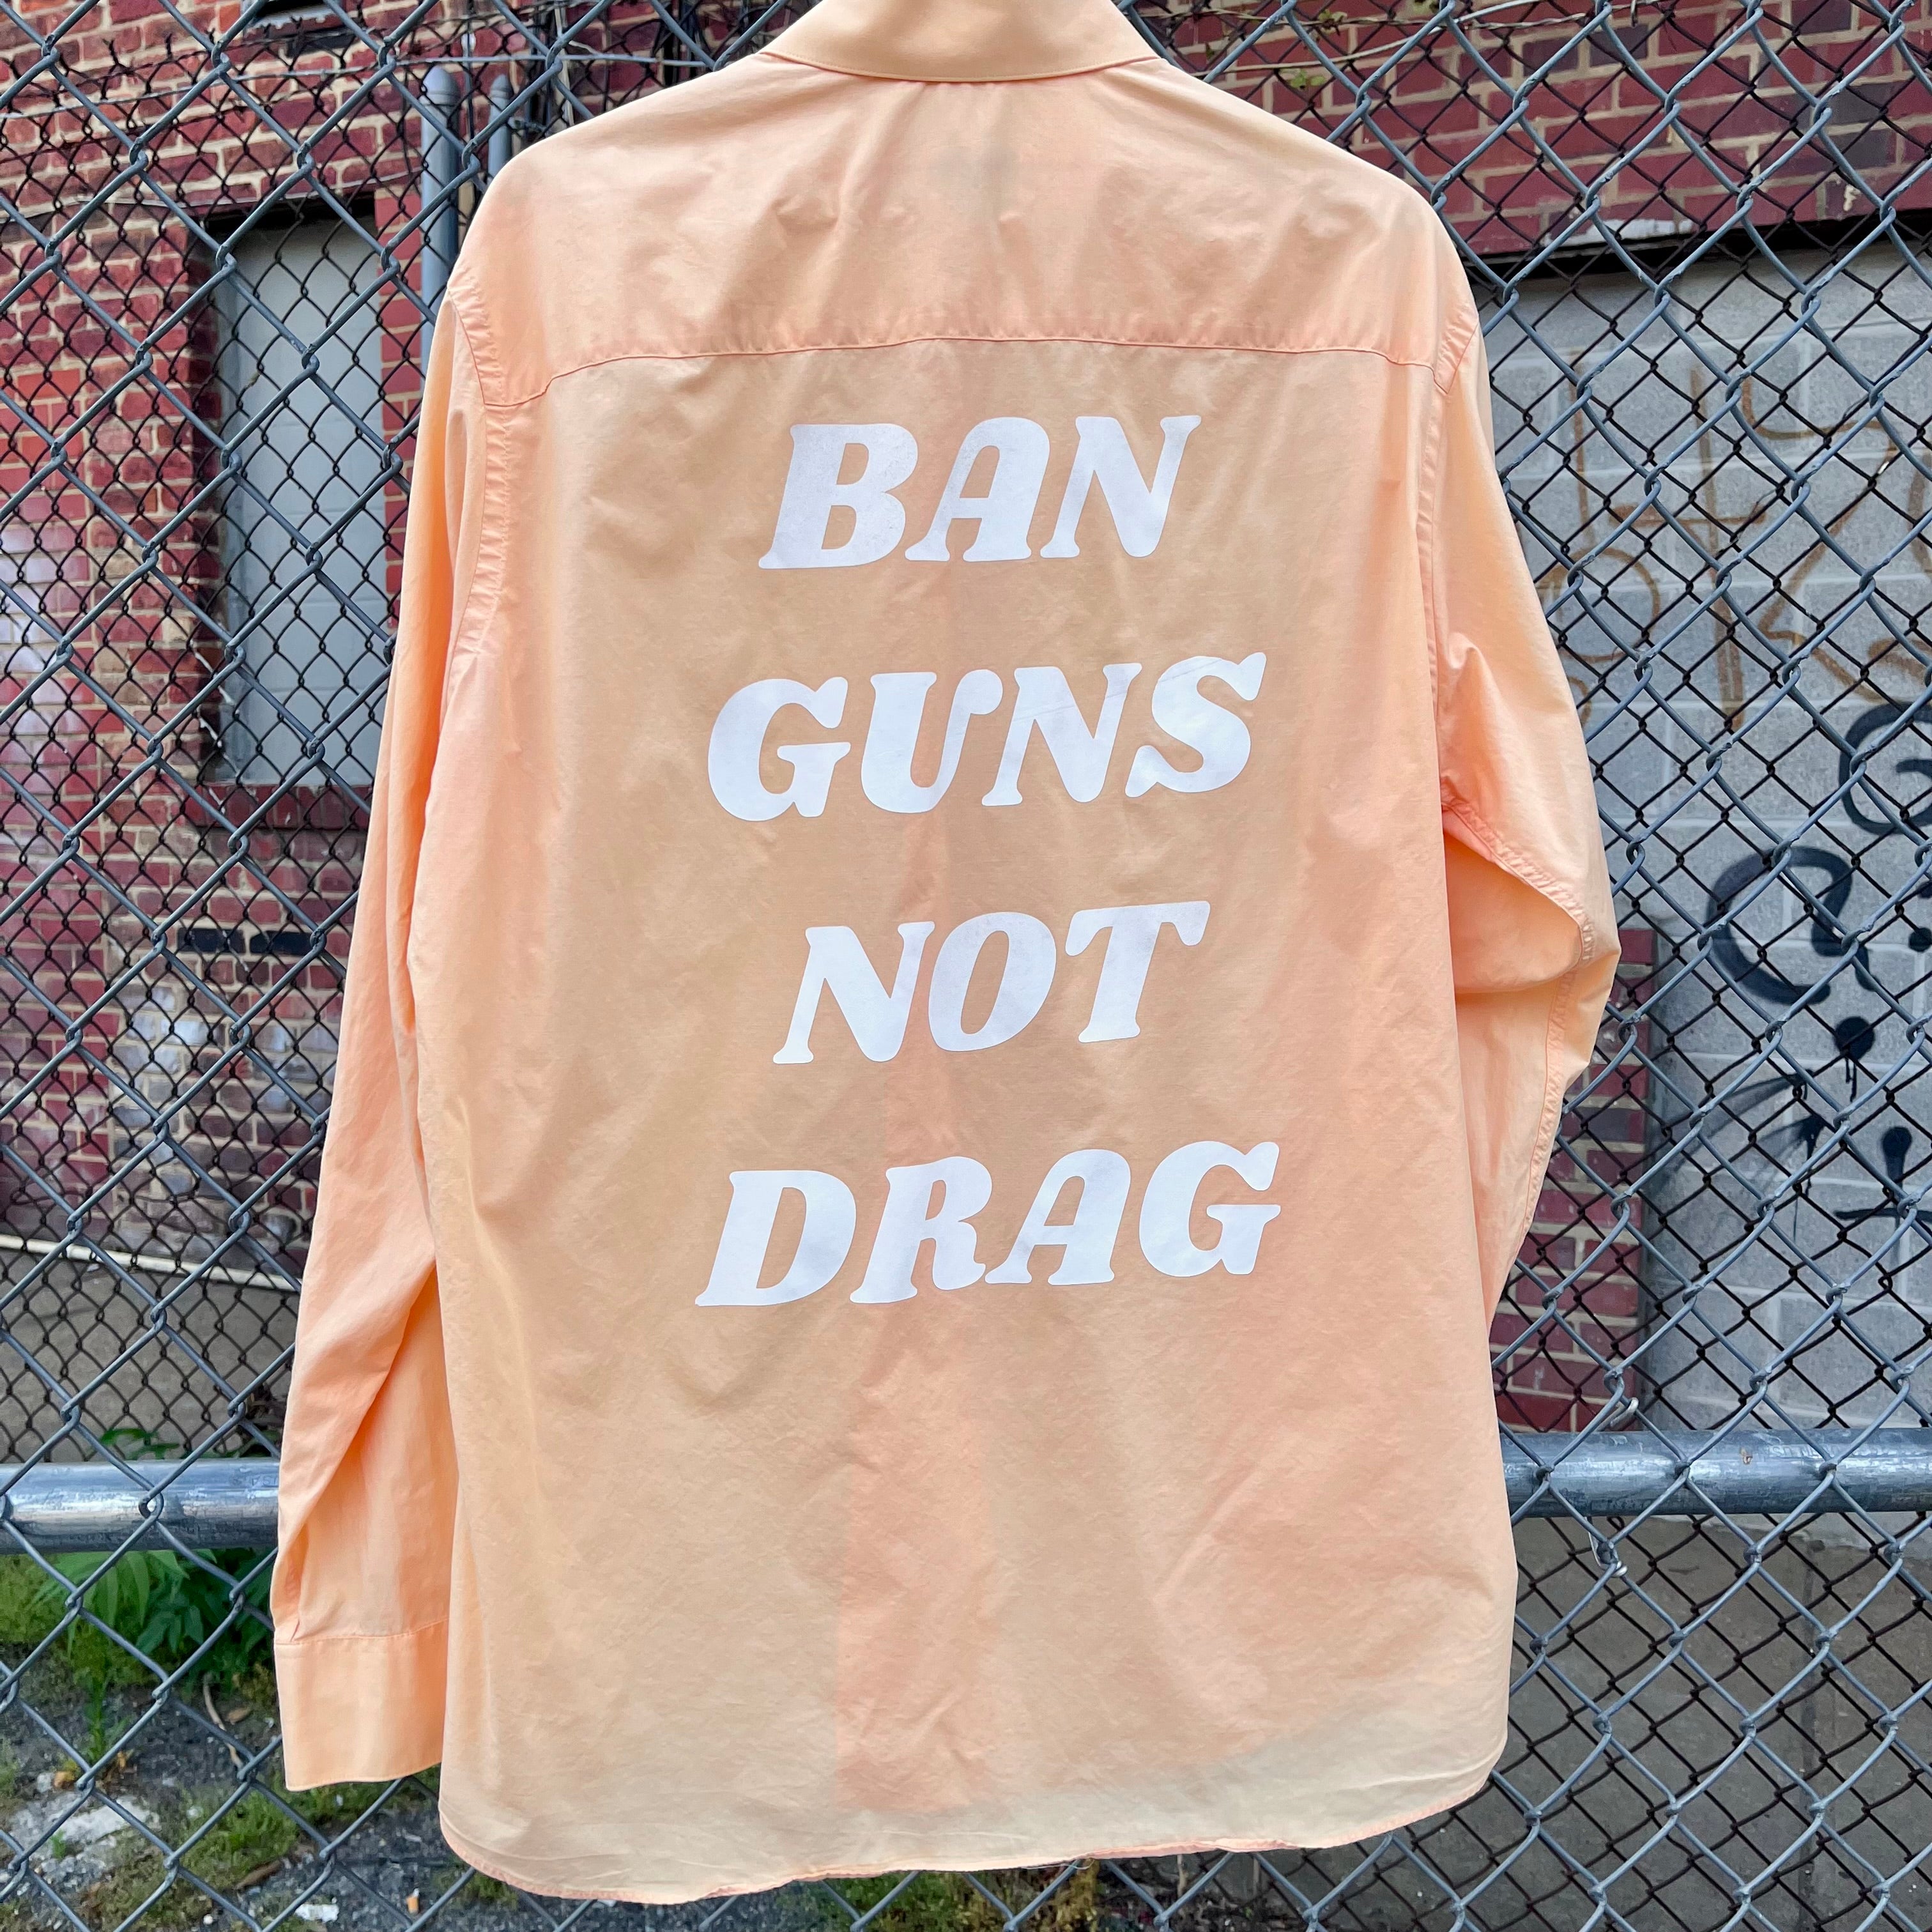 Orange up cycled button down with "Ban Guns Not Drag" printed across the back in a 70s font.